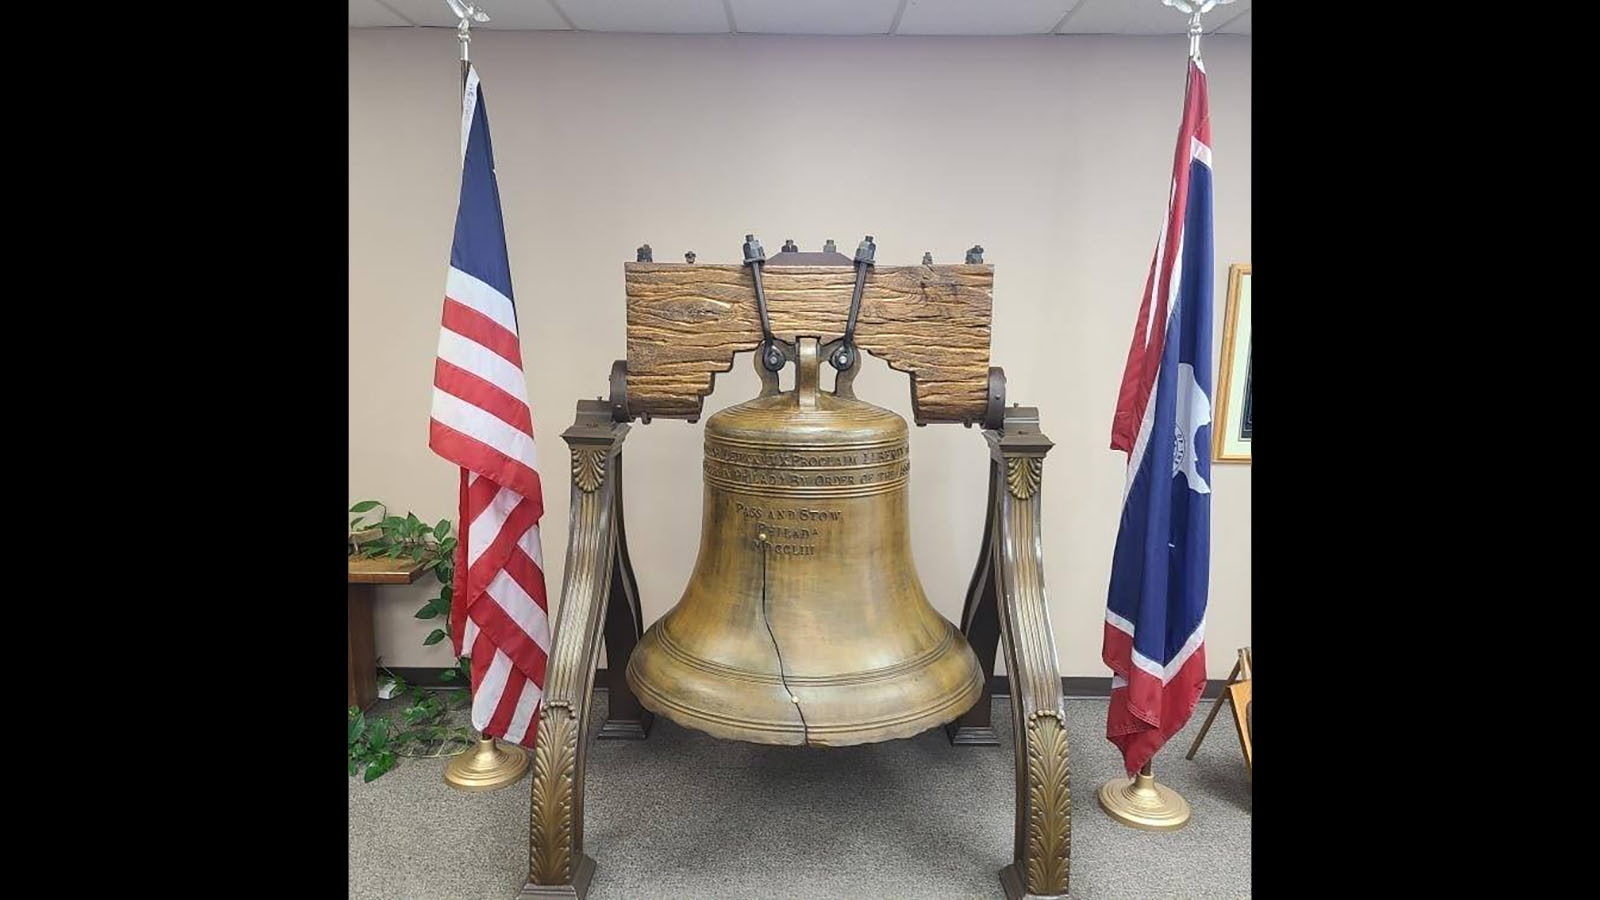 This exact replica of the Liberty Bell was made in 1966 and has been in Mills, Wyoming, since 1991.